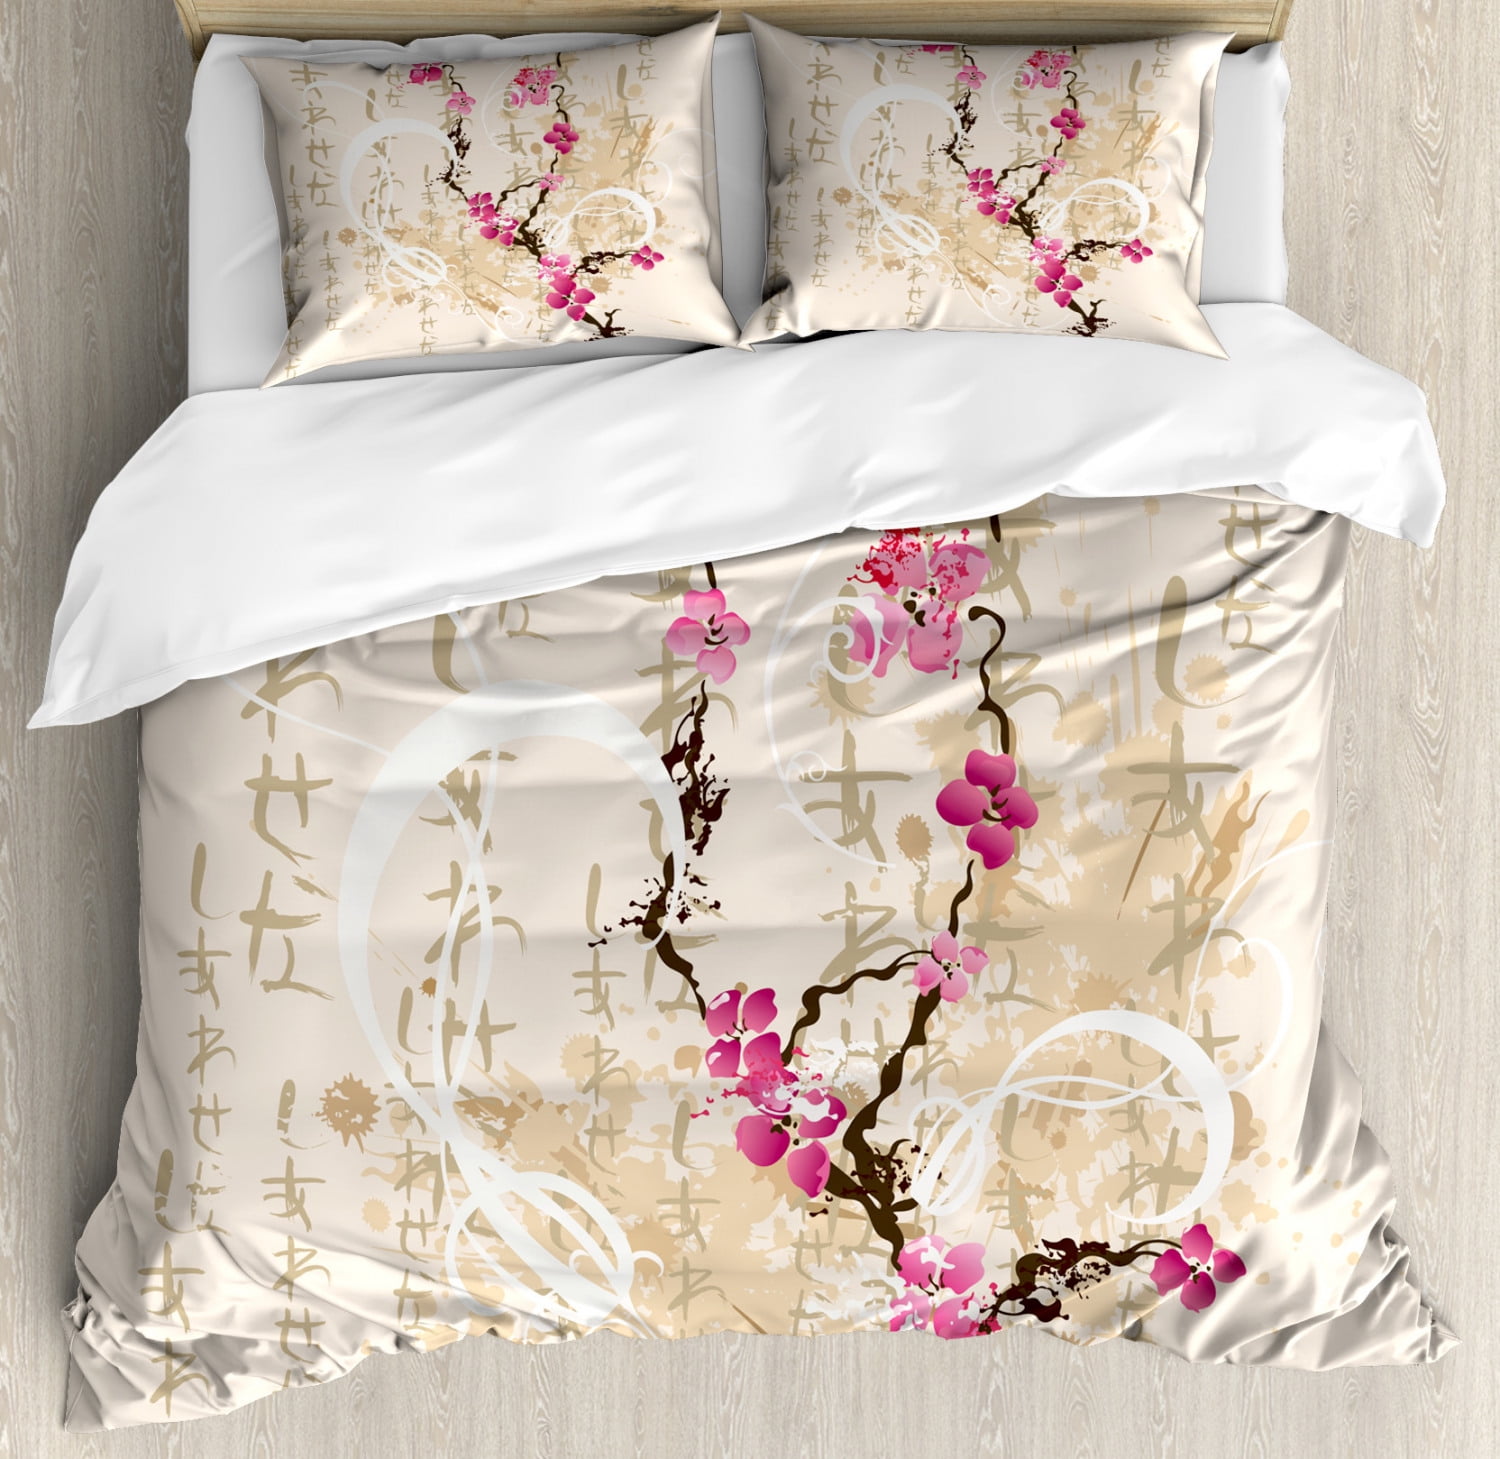 Cherry Blossoms Comforter Set Queen Size for Girls Women Japanese Red Floral Decor Bedding Set Adult Teens Japanese Style Quilted Coverlet Ukiyoe Theme Soft Bed Cover Mount Fuji Pattern Coverlet Set